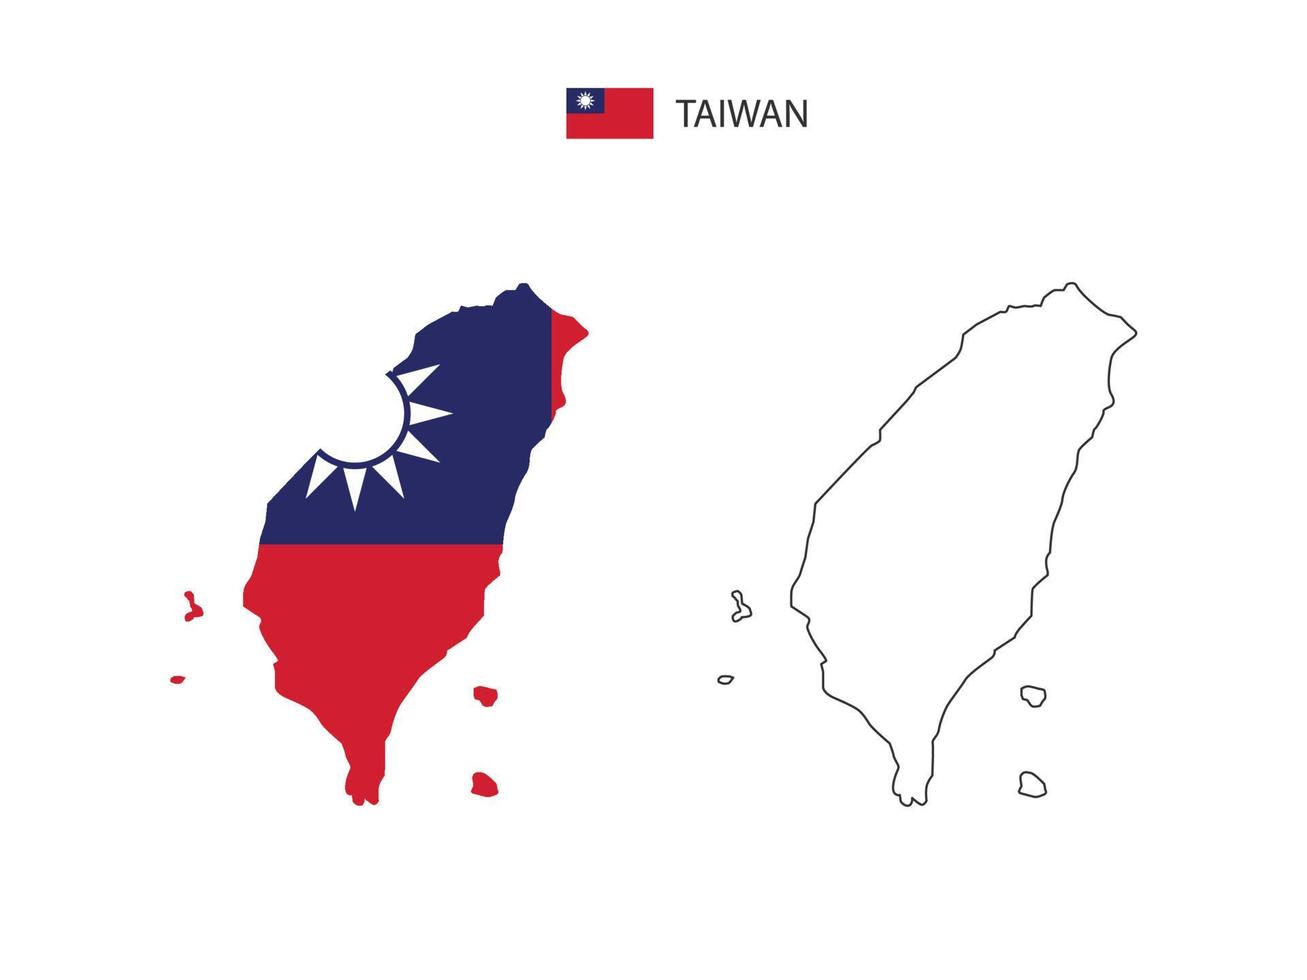 Taiwan map city vector divided by outline simplicity style. Have 2 versions, black thin line version and color of country flag version. Both map were on the white background.